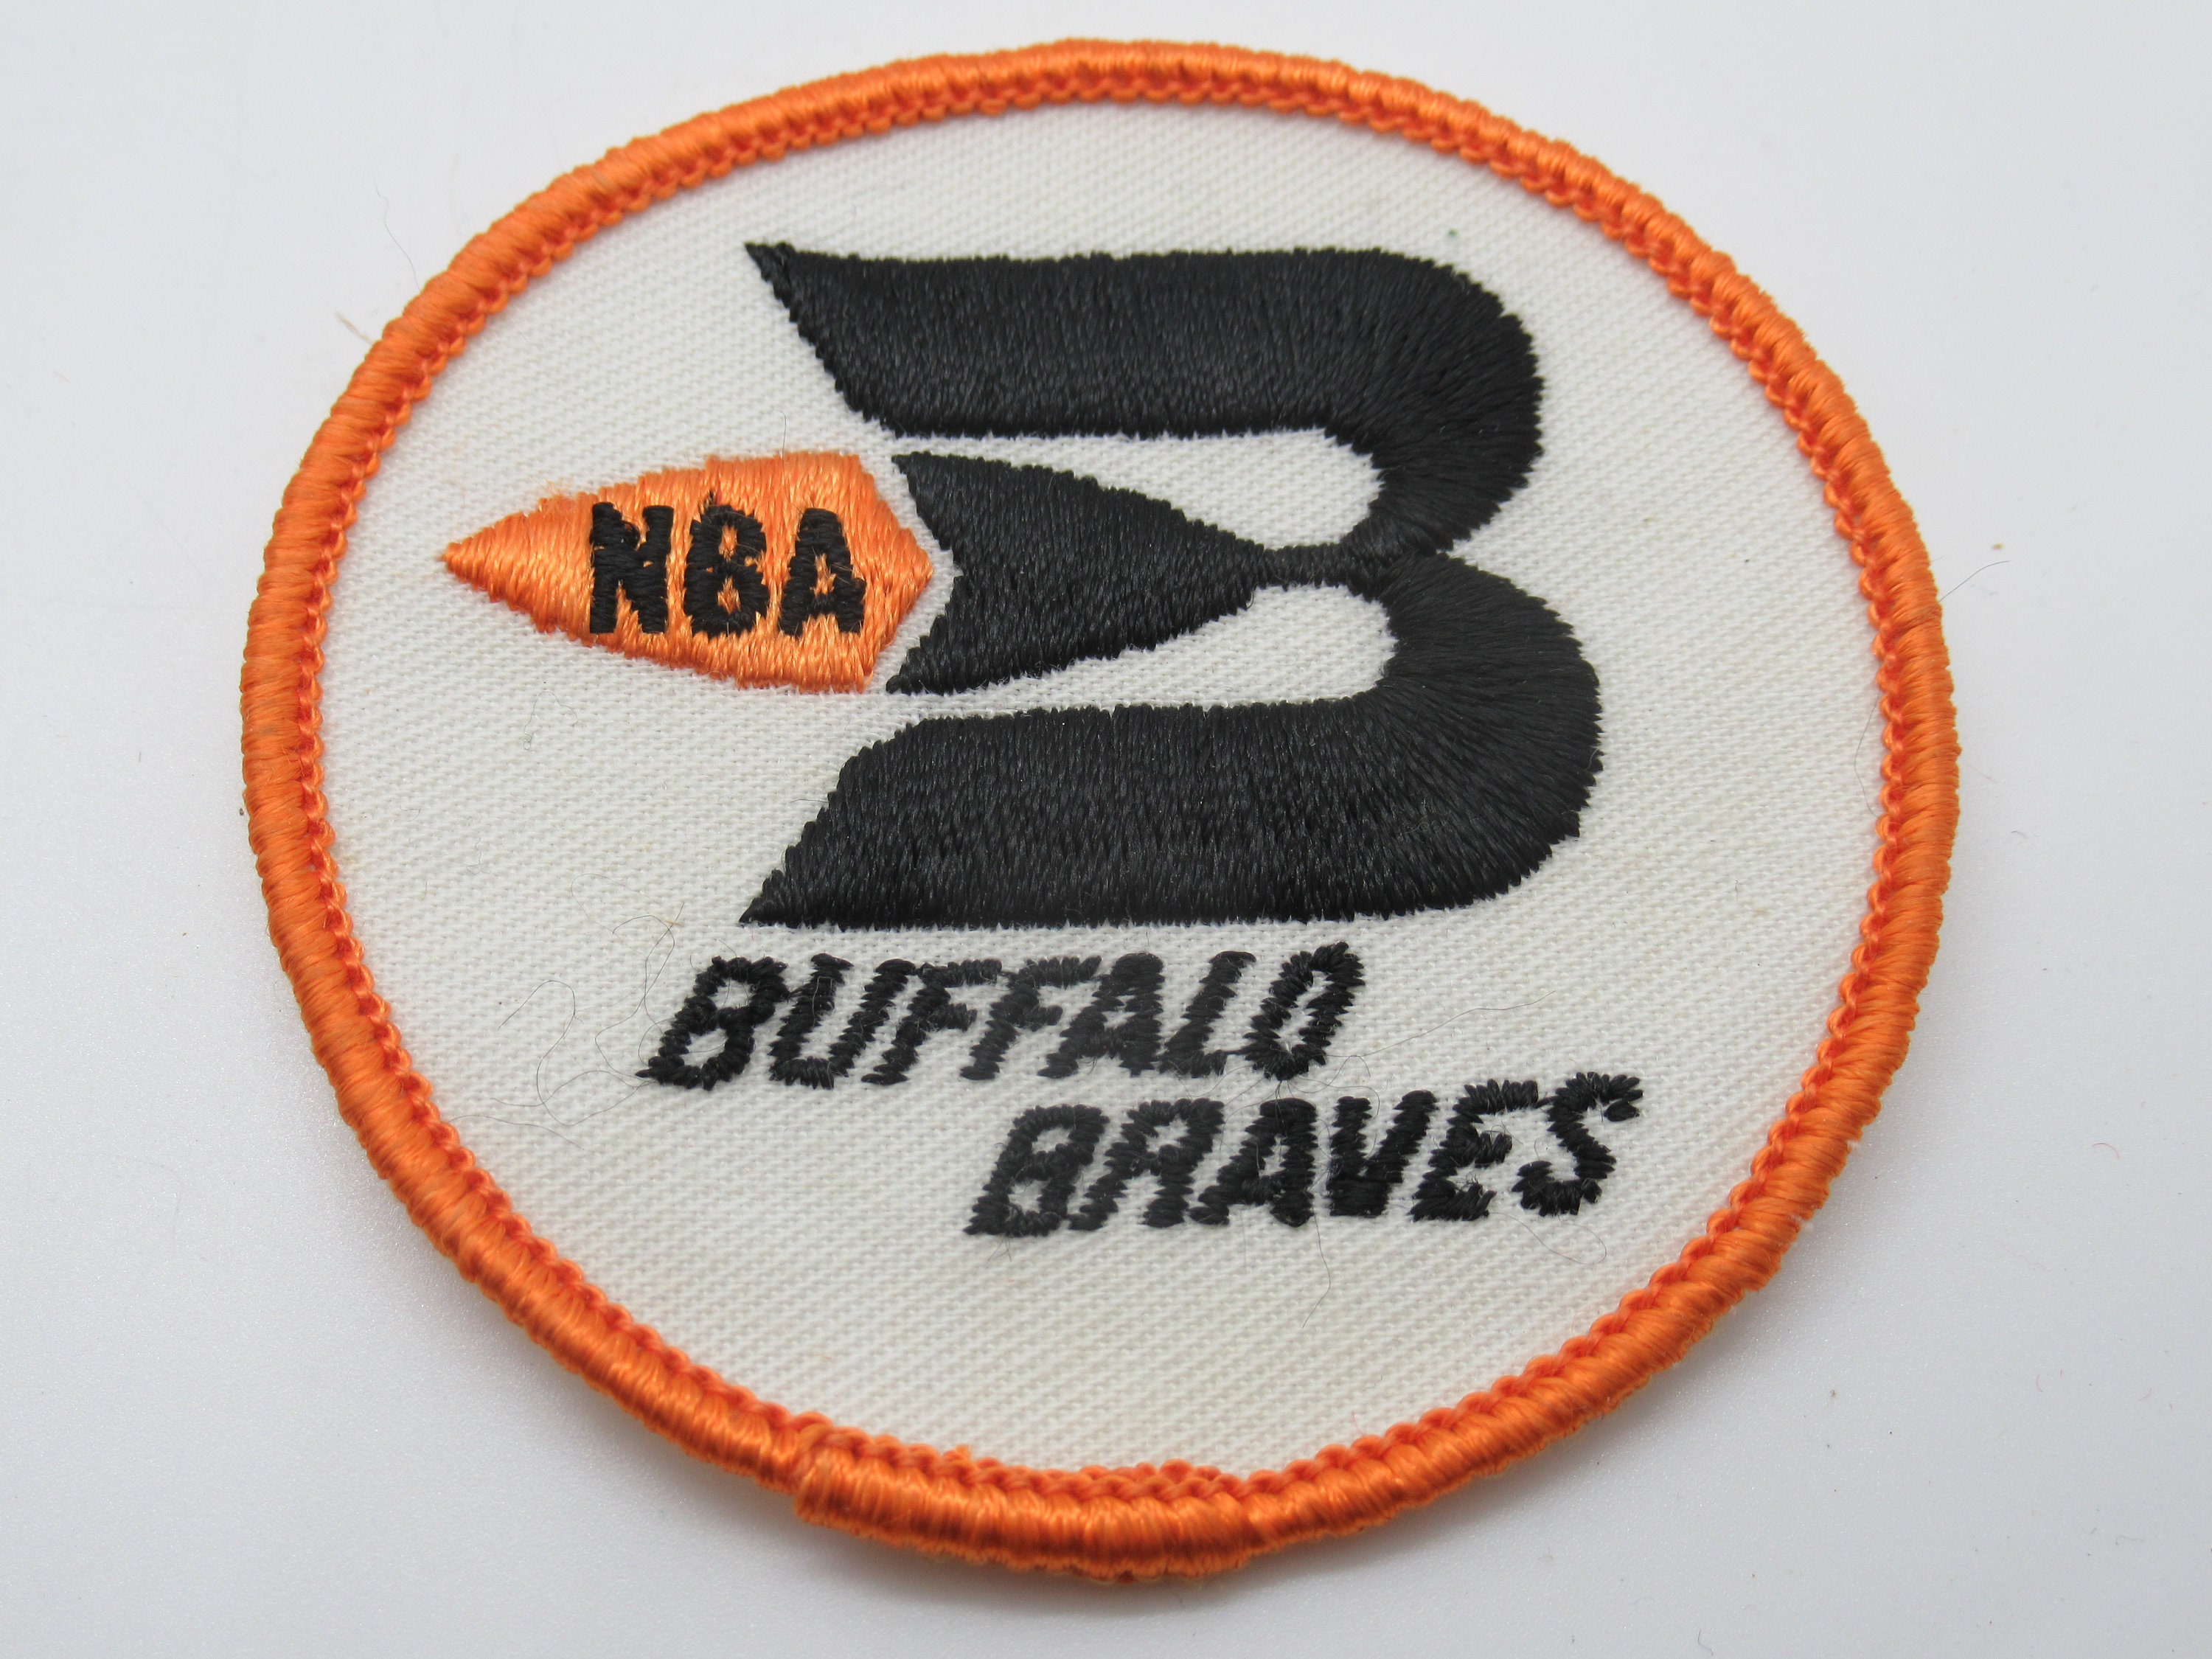 From The Buffalo Braves to the San Diego Clippers: The Inside